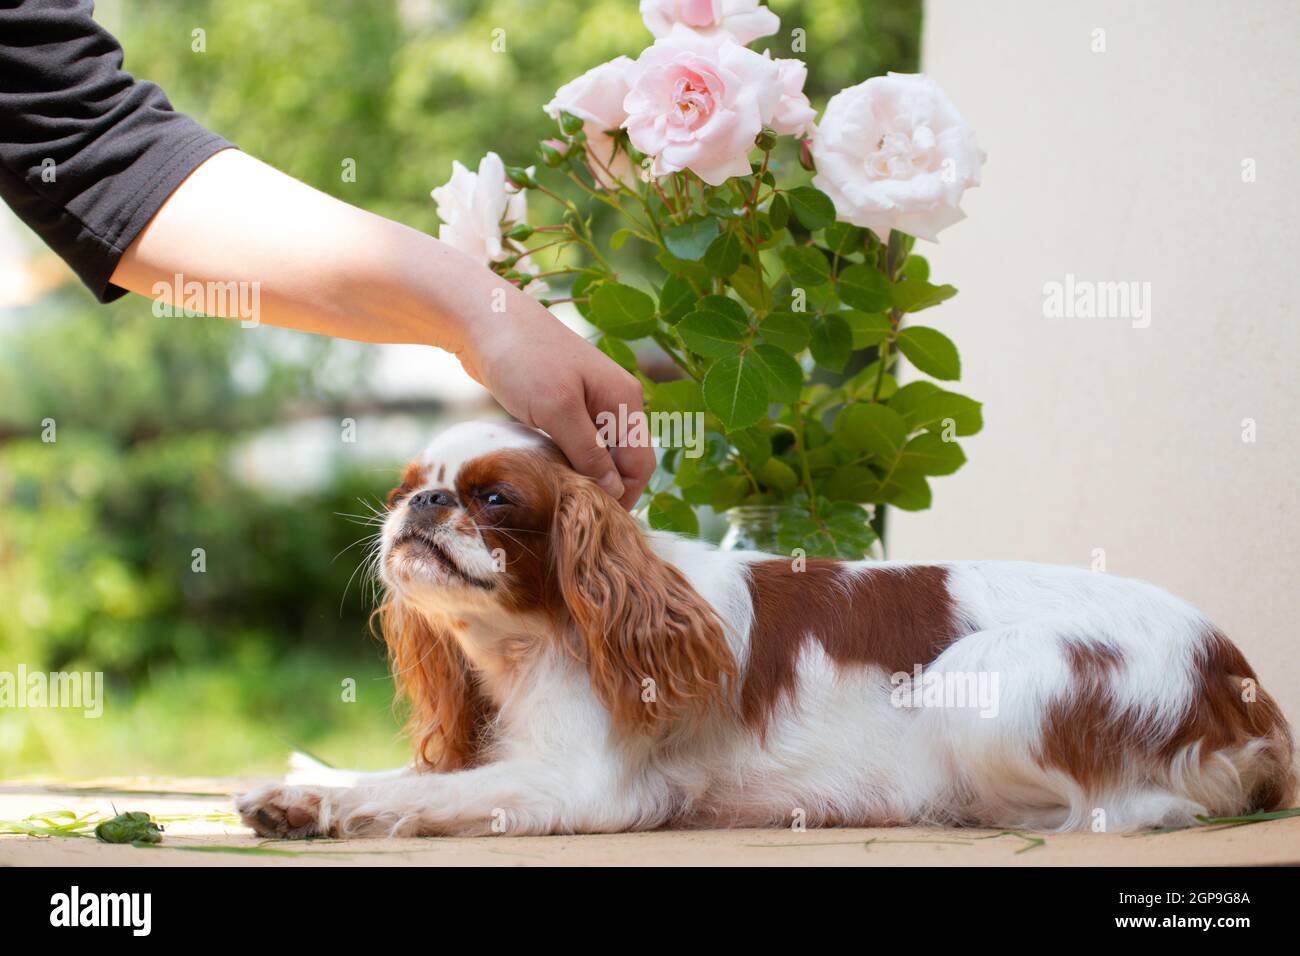 The white-red-colored dog breed Cavalier King Charles Spaniel is a stroking hand of man, against a background of flowers and beige cardboard, in summe Stock Photo